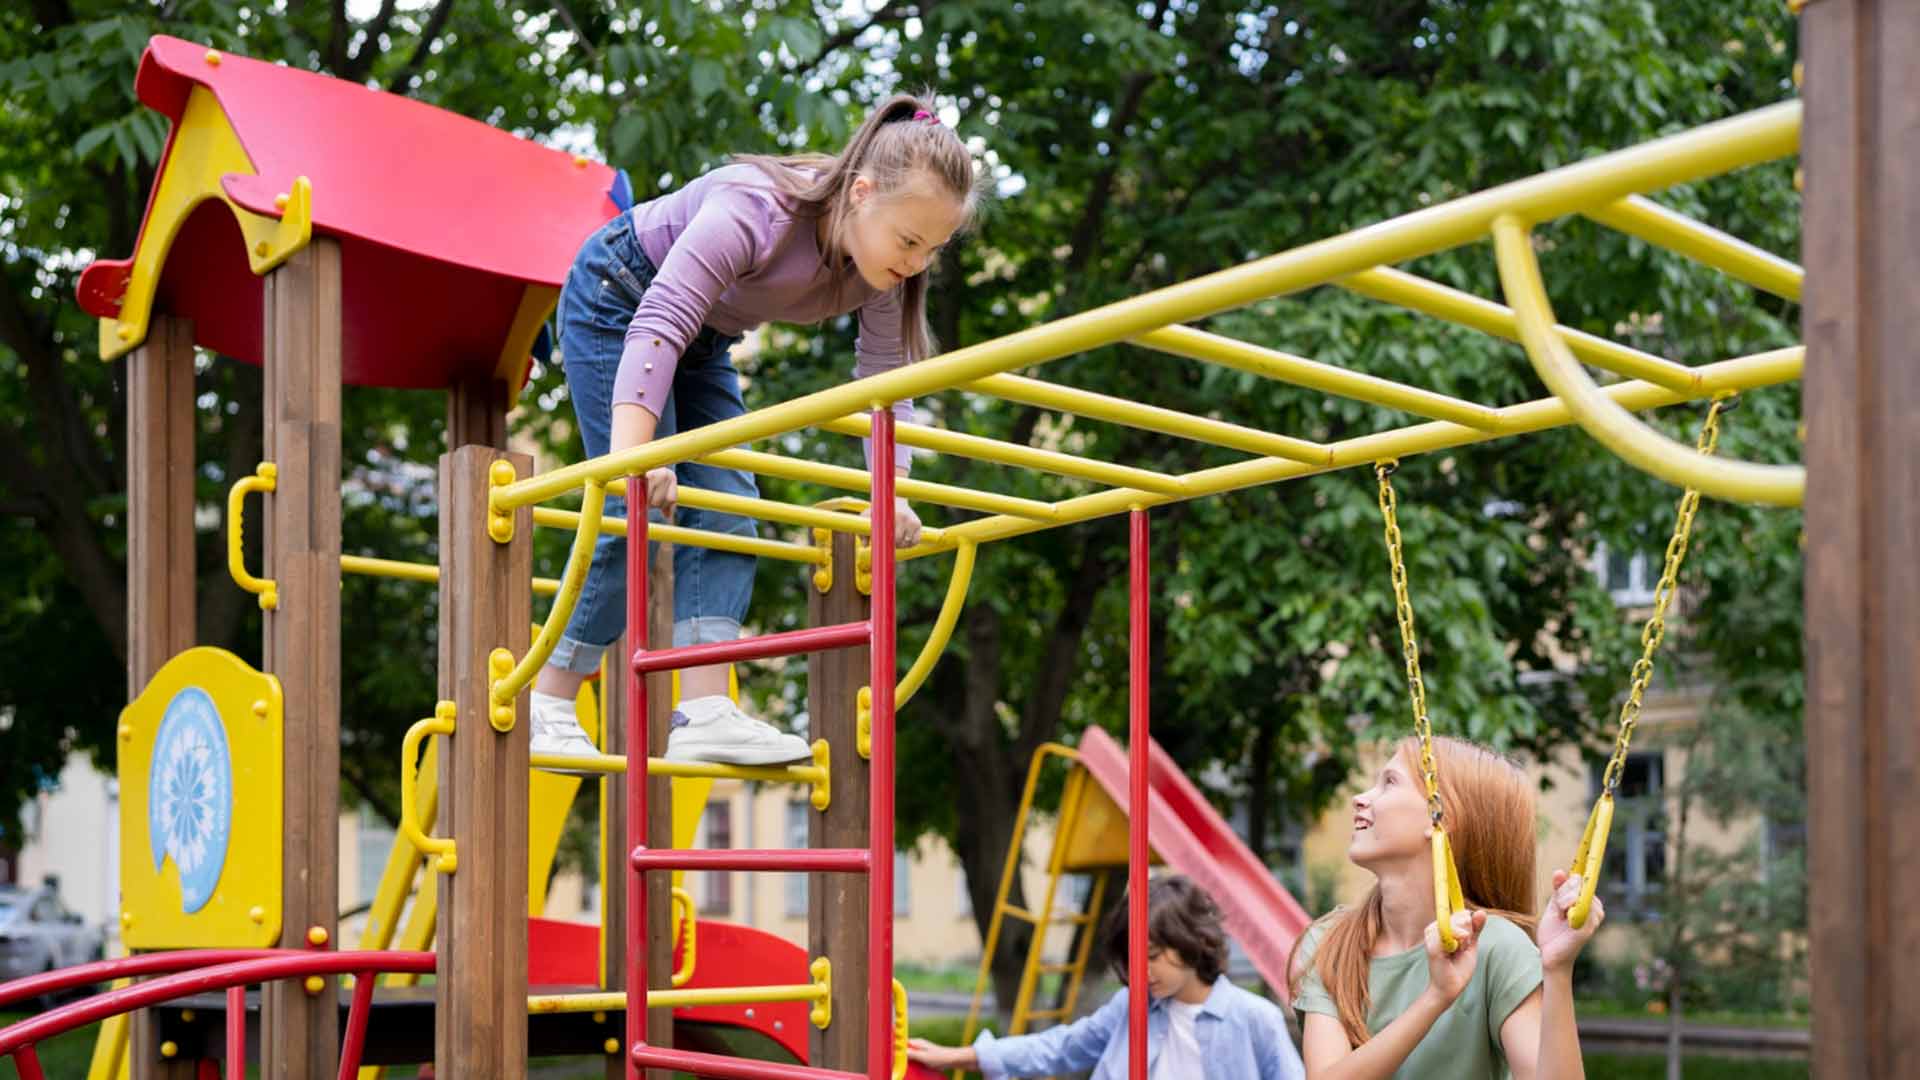 Why have Playground Safety Week?